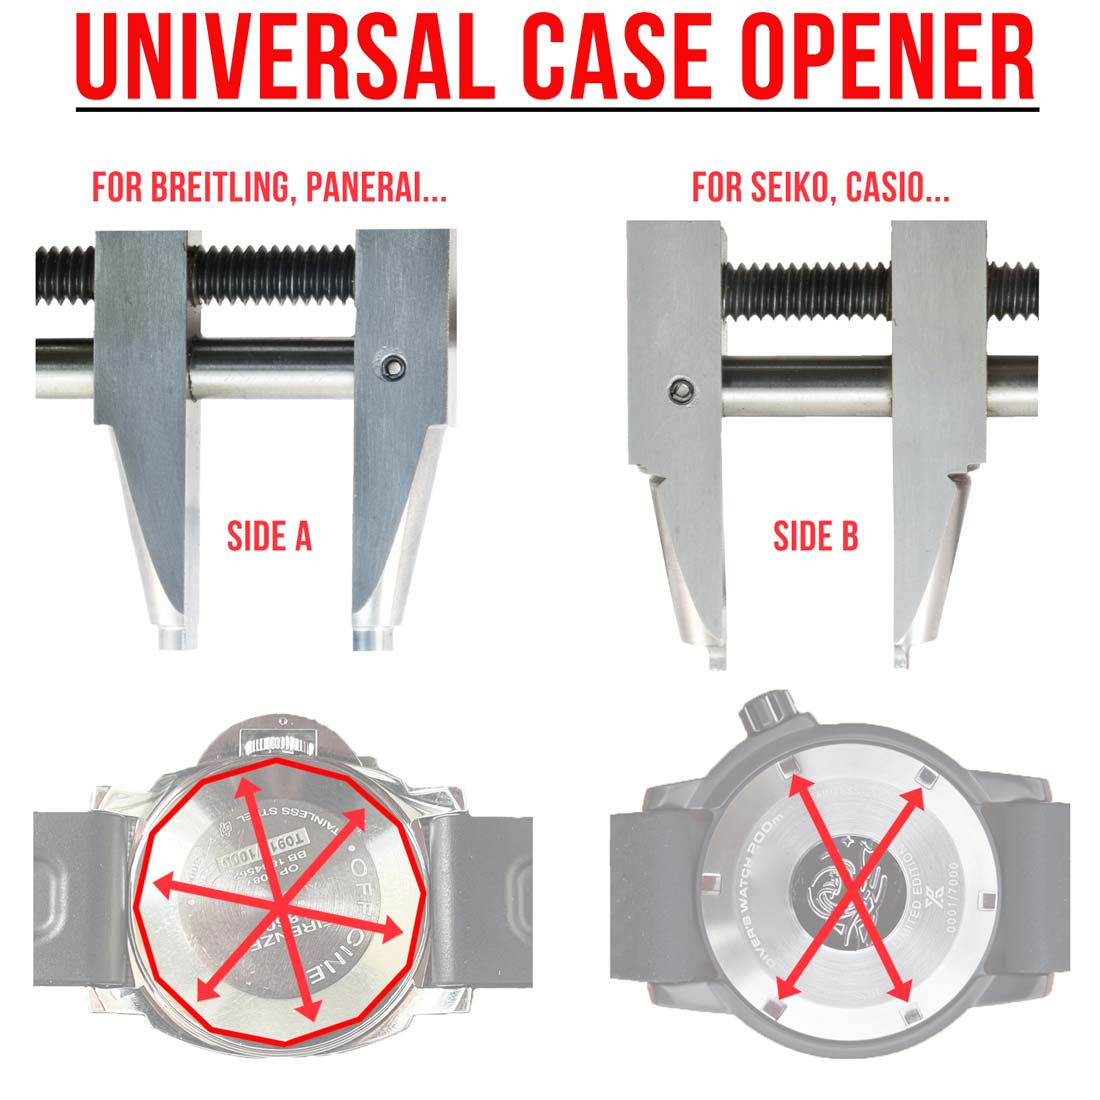 CO-635, Universal Screw Back Case Opener / Remover for Waterproof Breitling and Seiko Watches